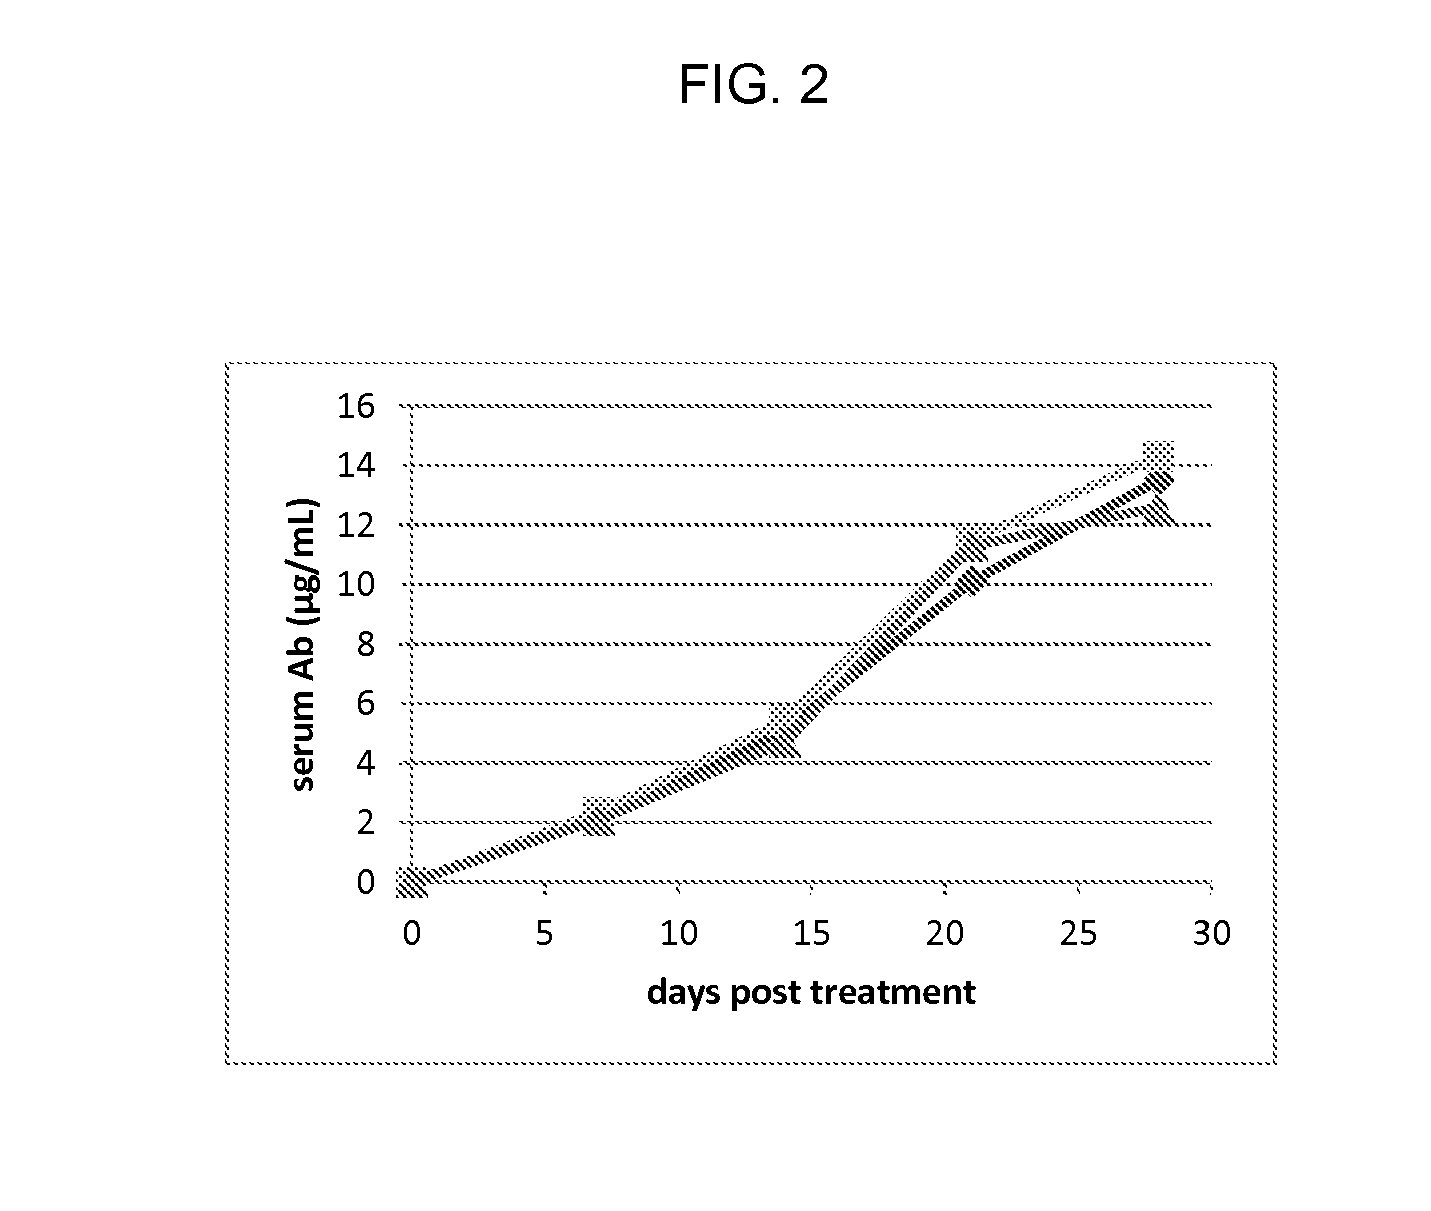 Veterinary composition and methods for non-surgical neutering and castration